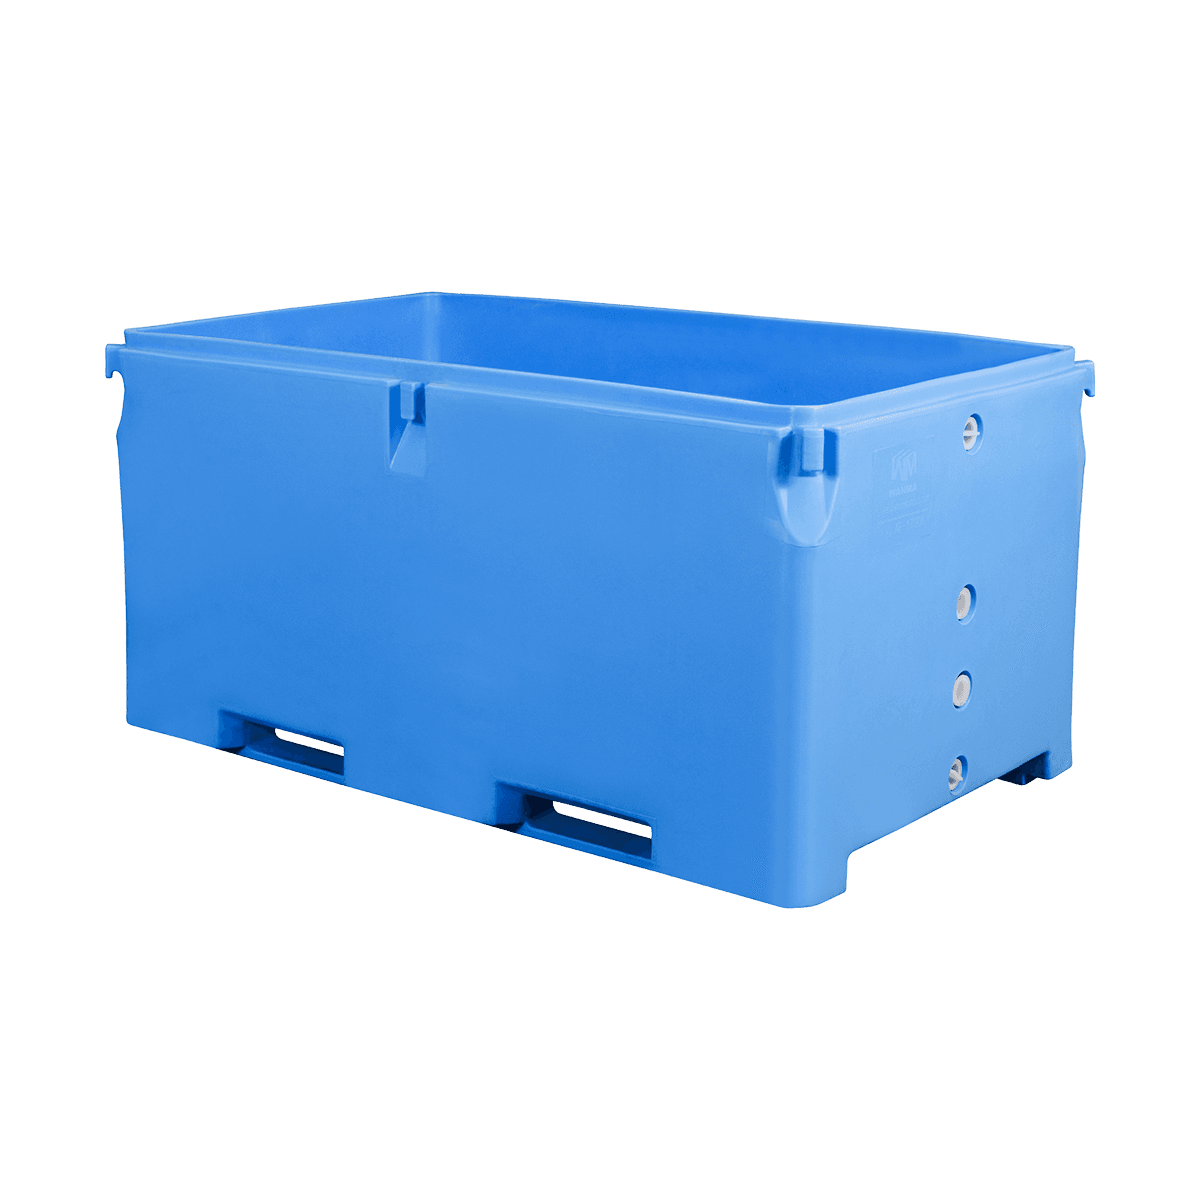 AF-1700L Large Tuna Fish Long Distance Live Fish Transportation and Storage Containers